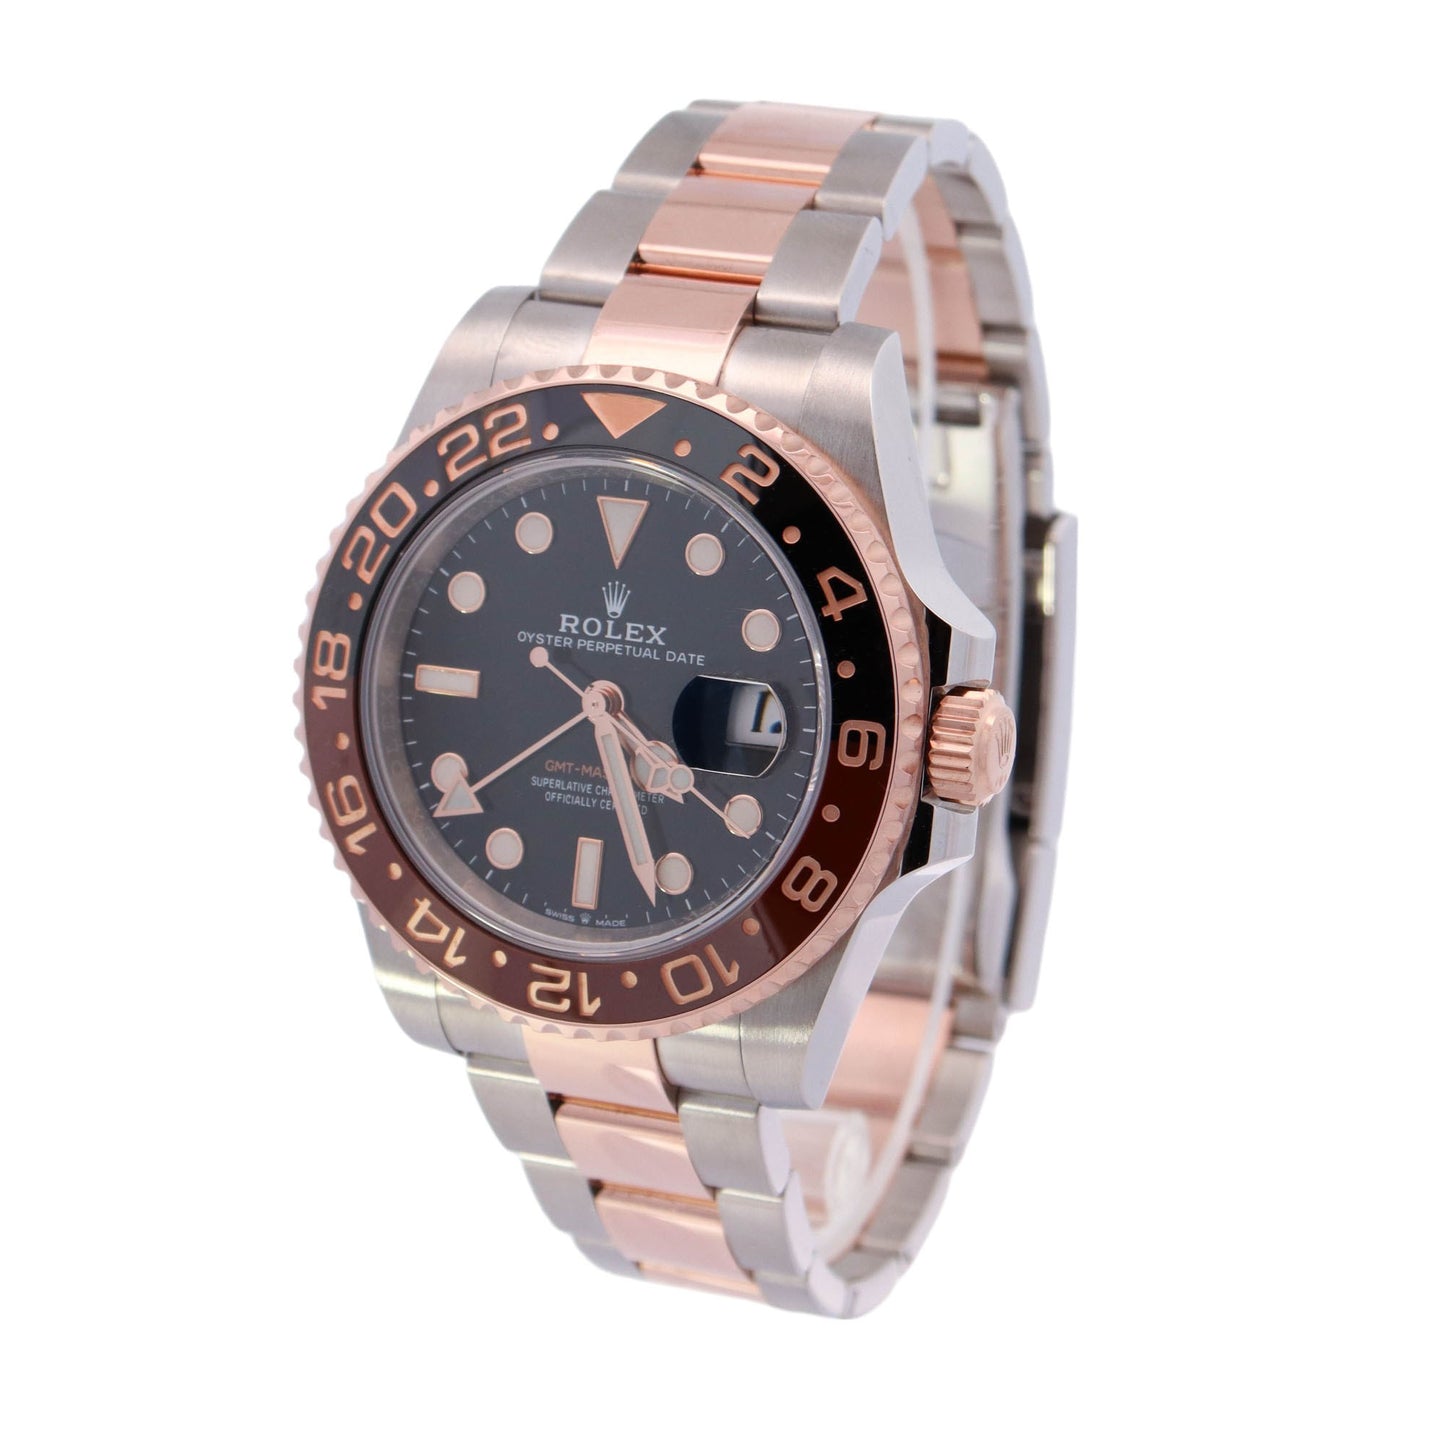 Rolex GMT Master II "Rootbeer" Two Tone Rose Gold & Steel 40mm Black Dot Dial Watch Reference# 126711CHNR - Happy Jewelers Fine Jewelry Lifetime Warranty